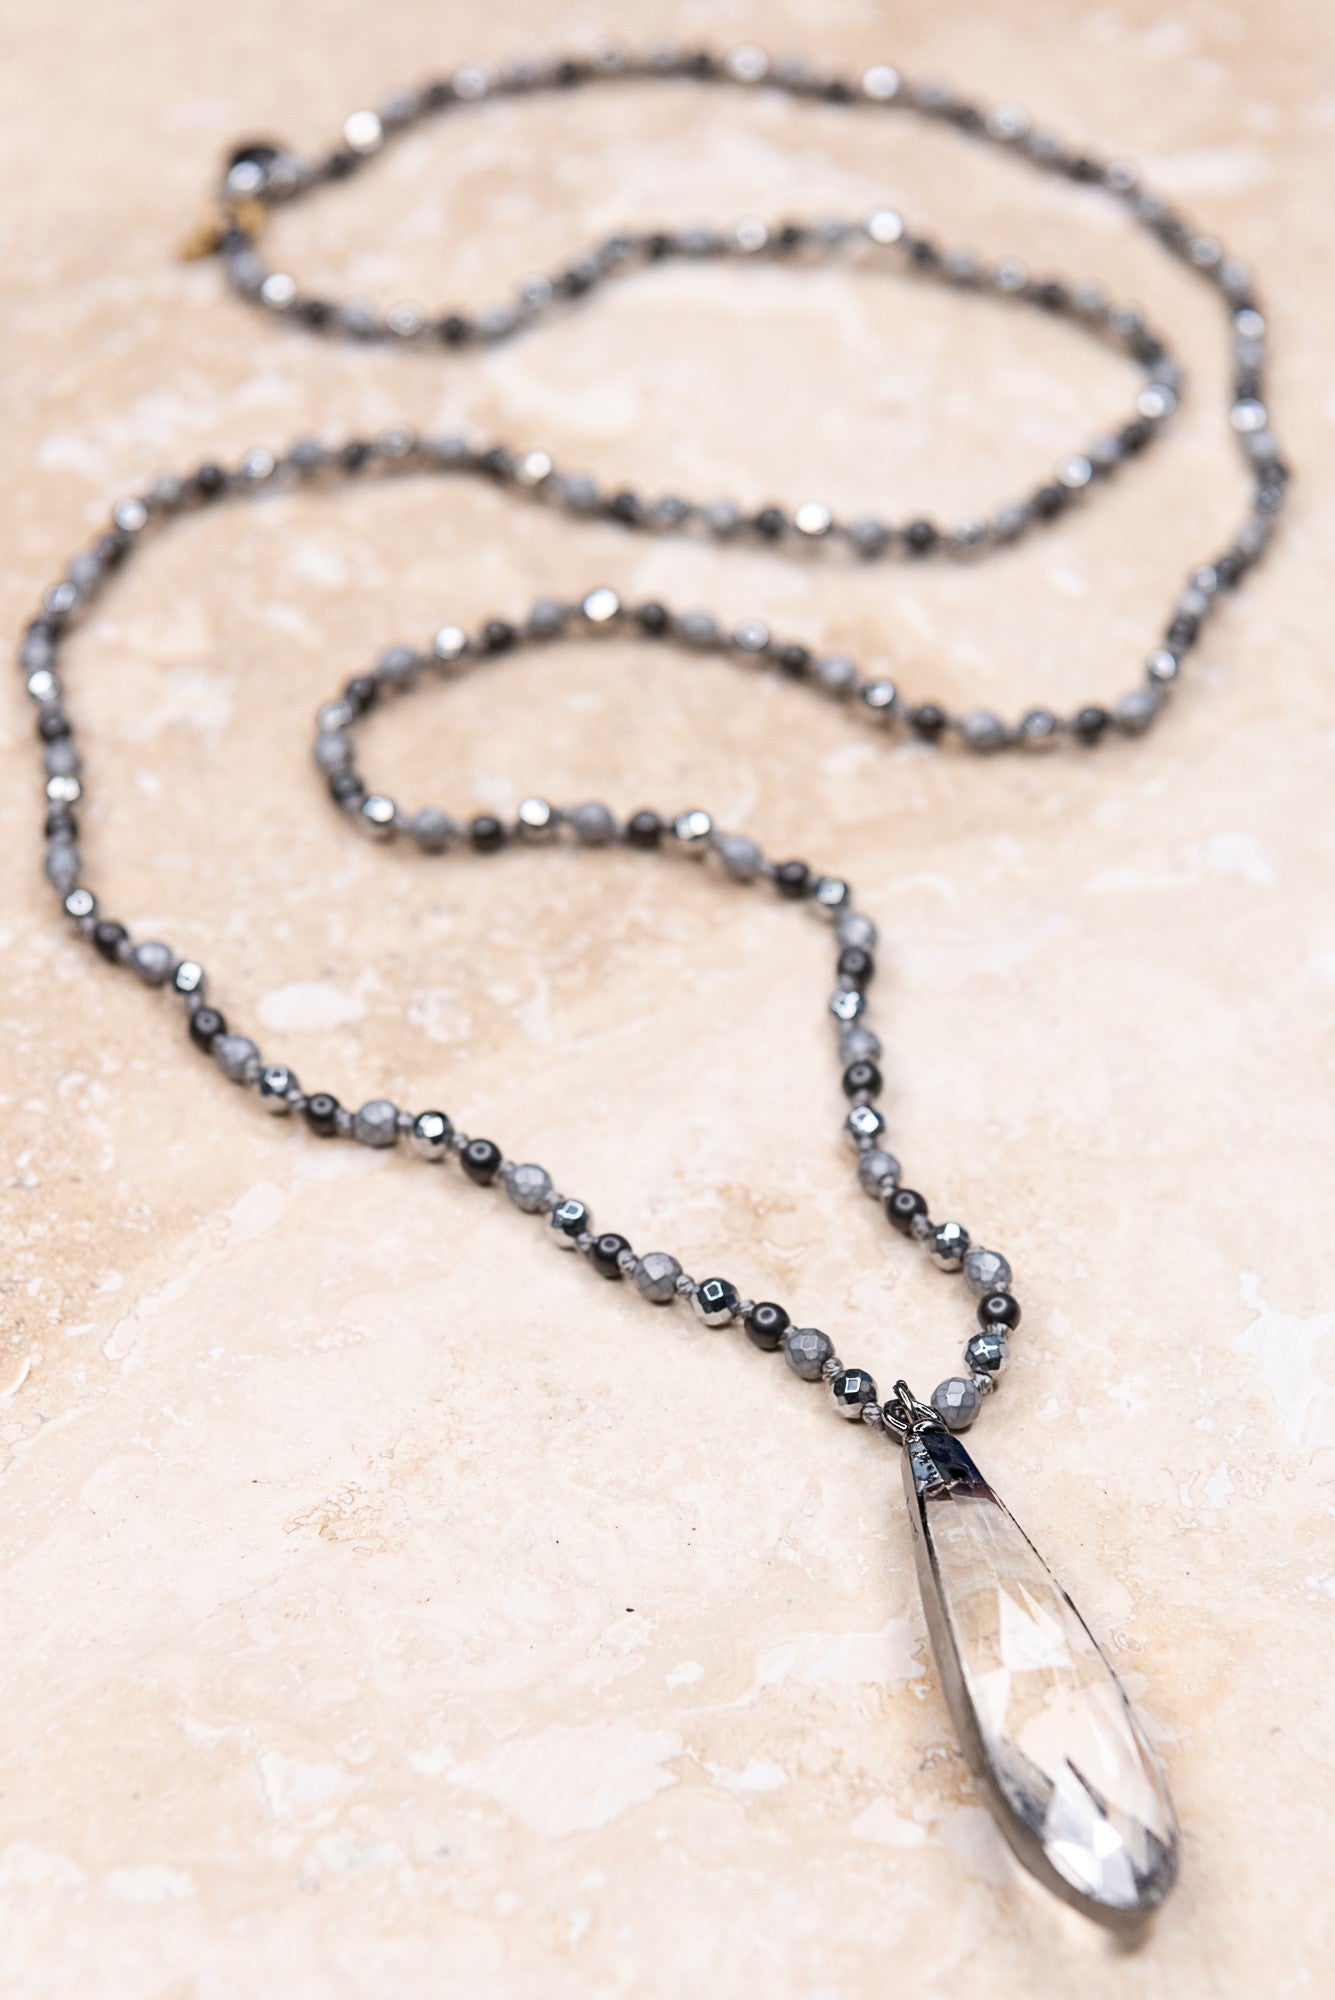 Skinny Beaded Necklace with Crystal Teardrop - Gray/Silver